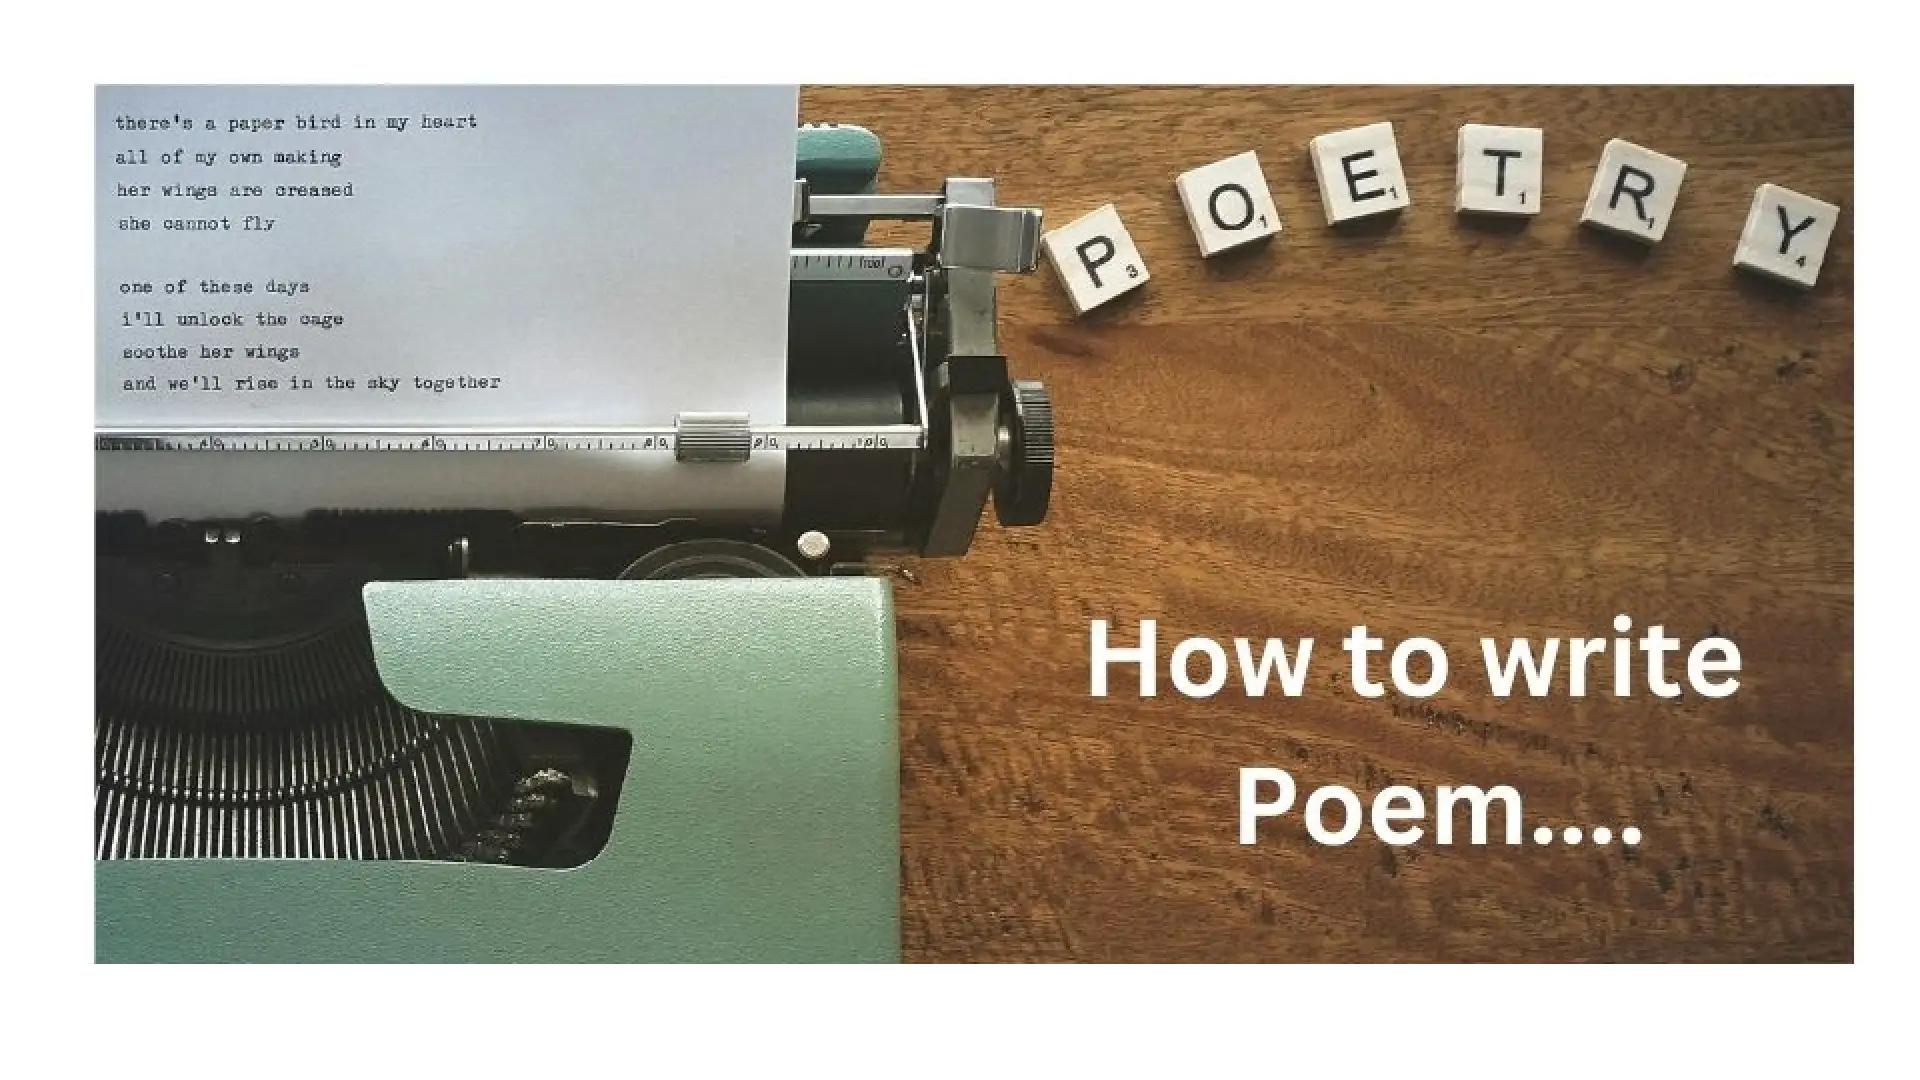 How to write poem